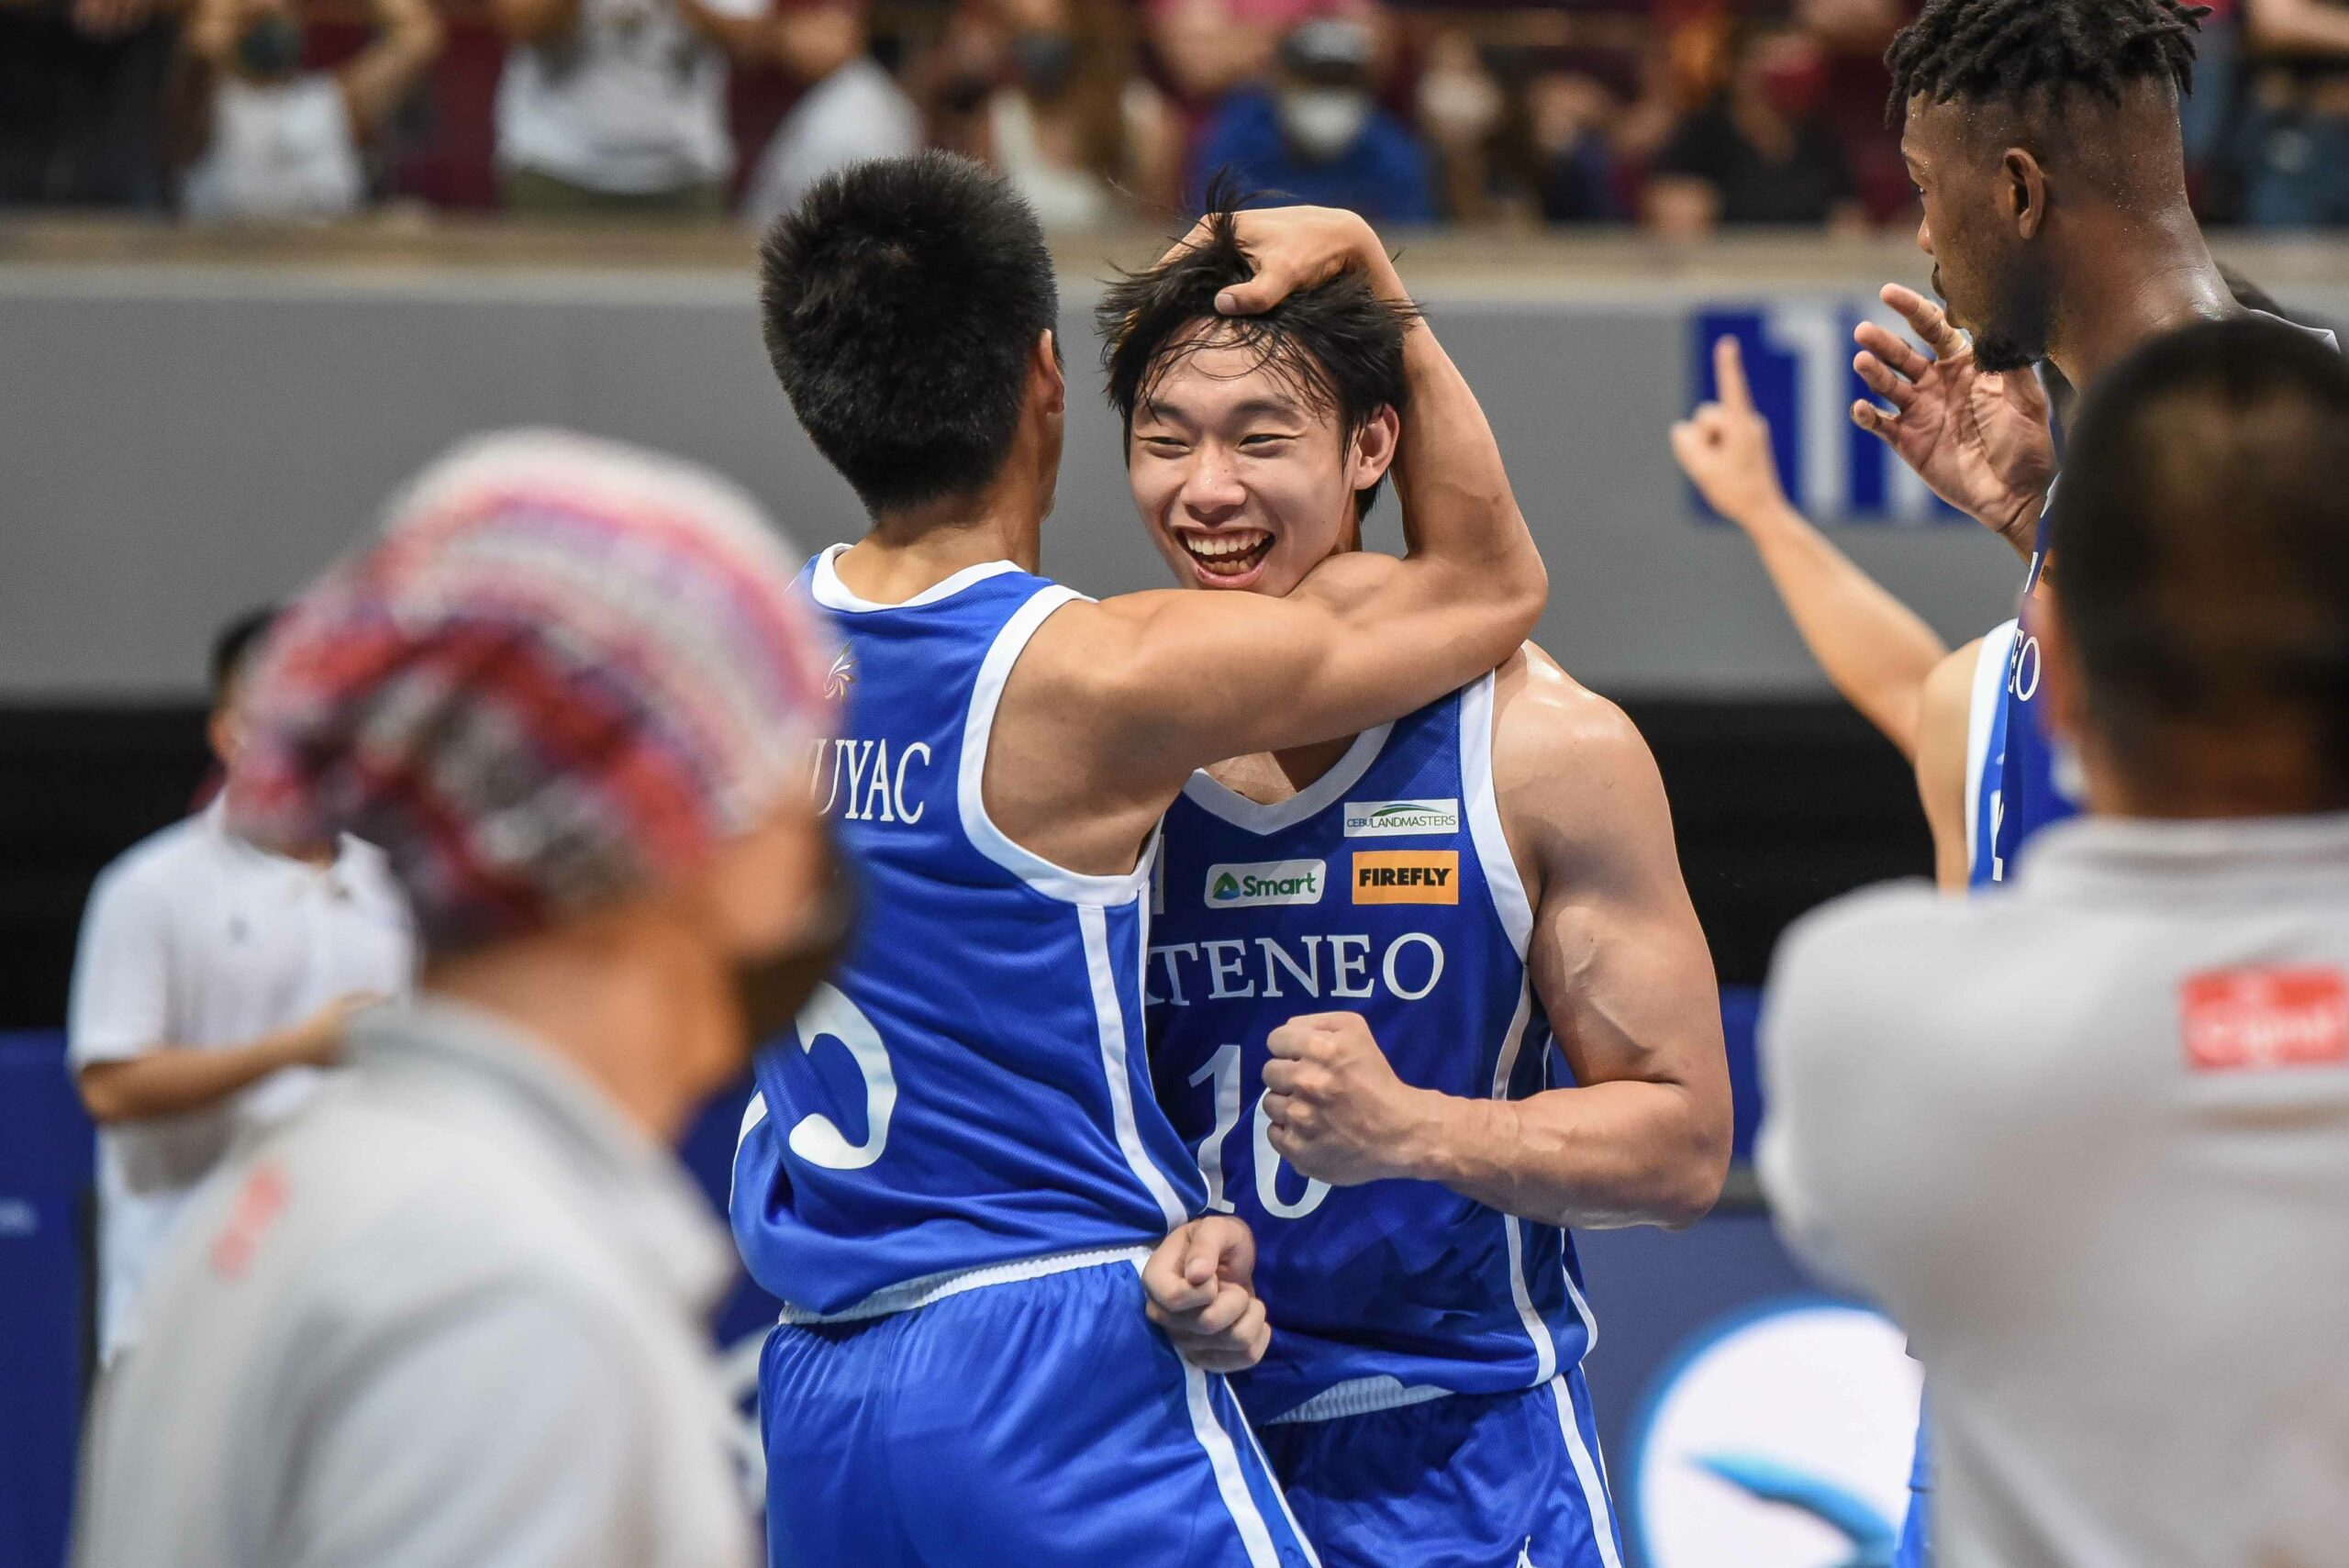 UAAP-84-Mens-Basketball-UP-vs-Ateneo-Dave-Ildefonso-3-scaled UAAP 84: Kouame, Ateneo show heart of a champion, force winner-take-all vs UP ADMU Basketball News UAAP UP  - philippine sports news